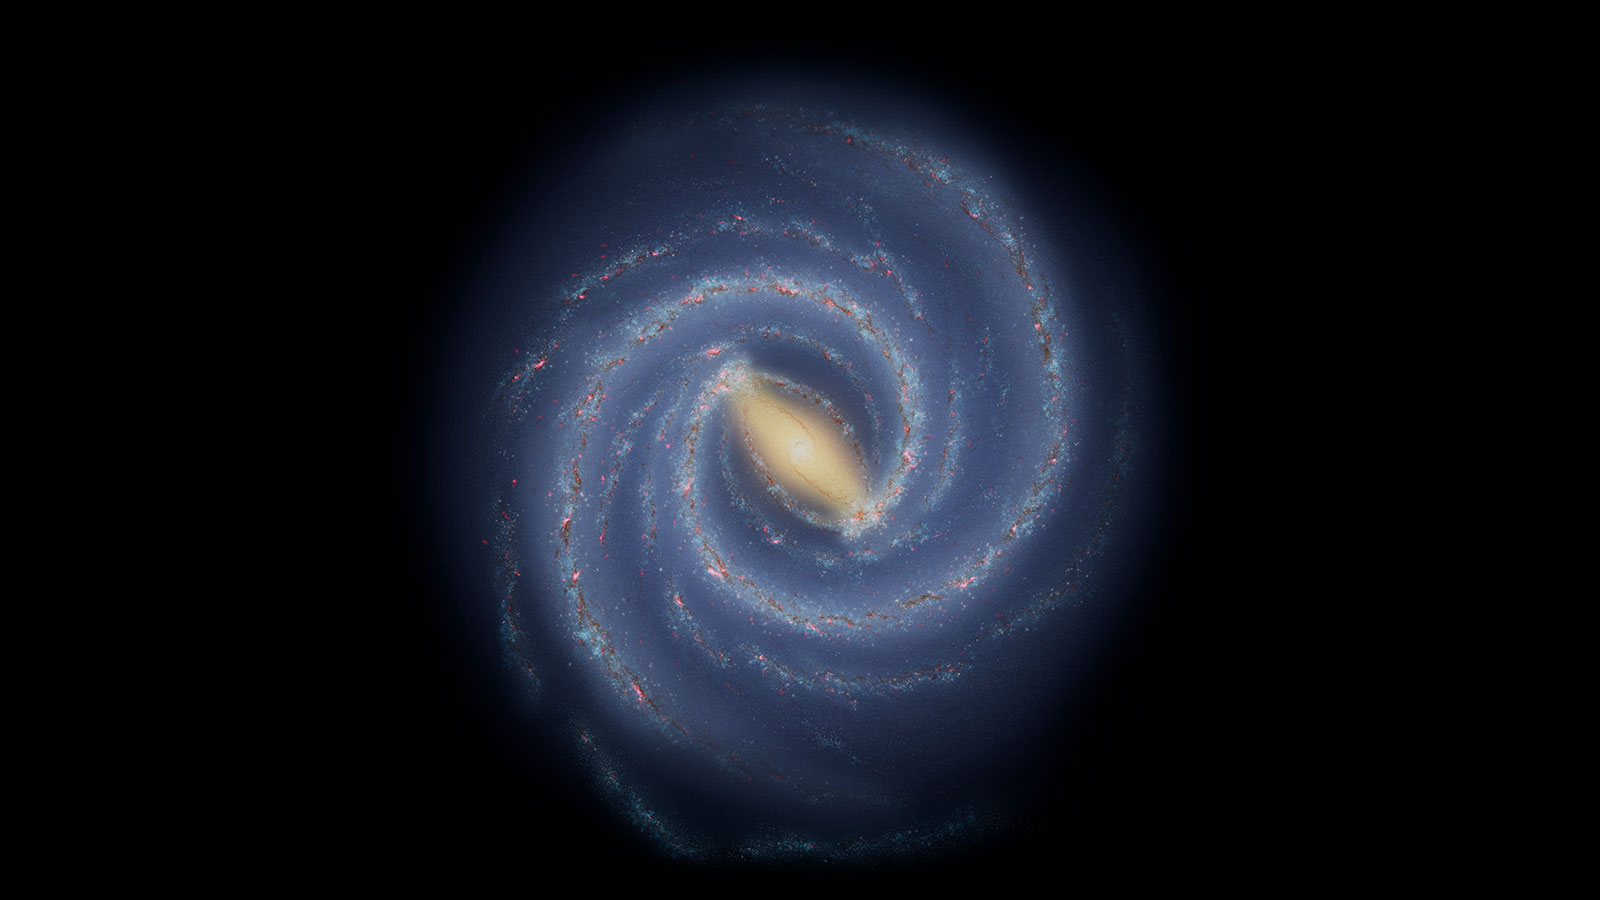 Illustrations shows the  structure of the Milky Way